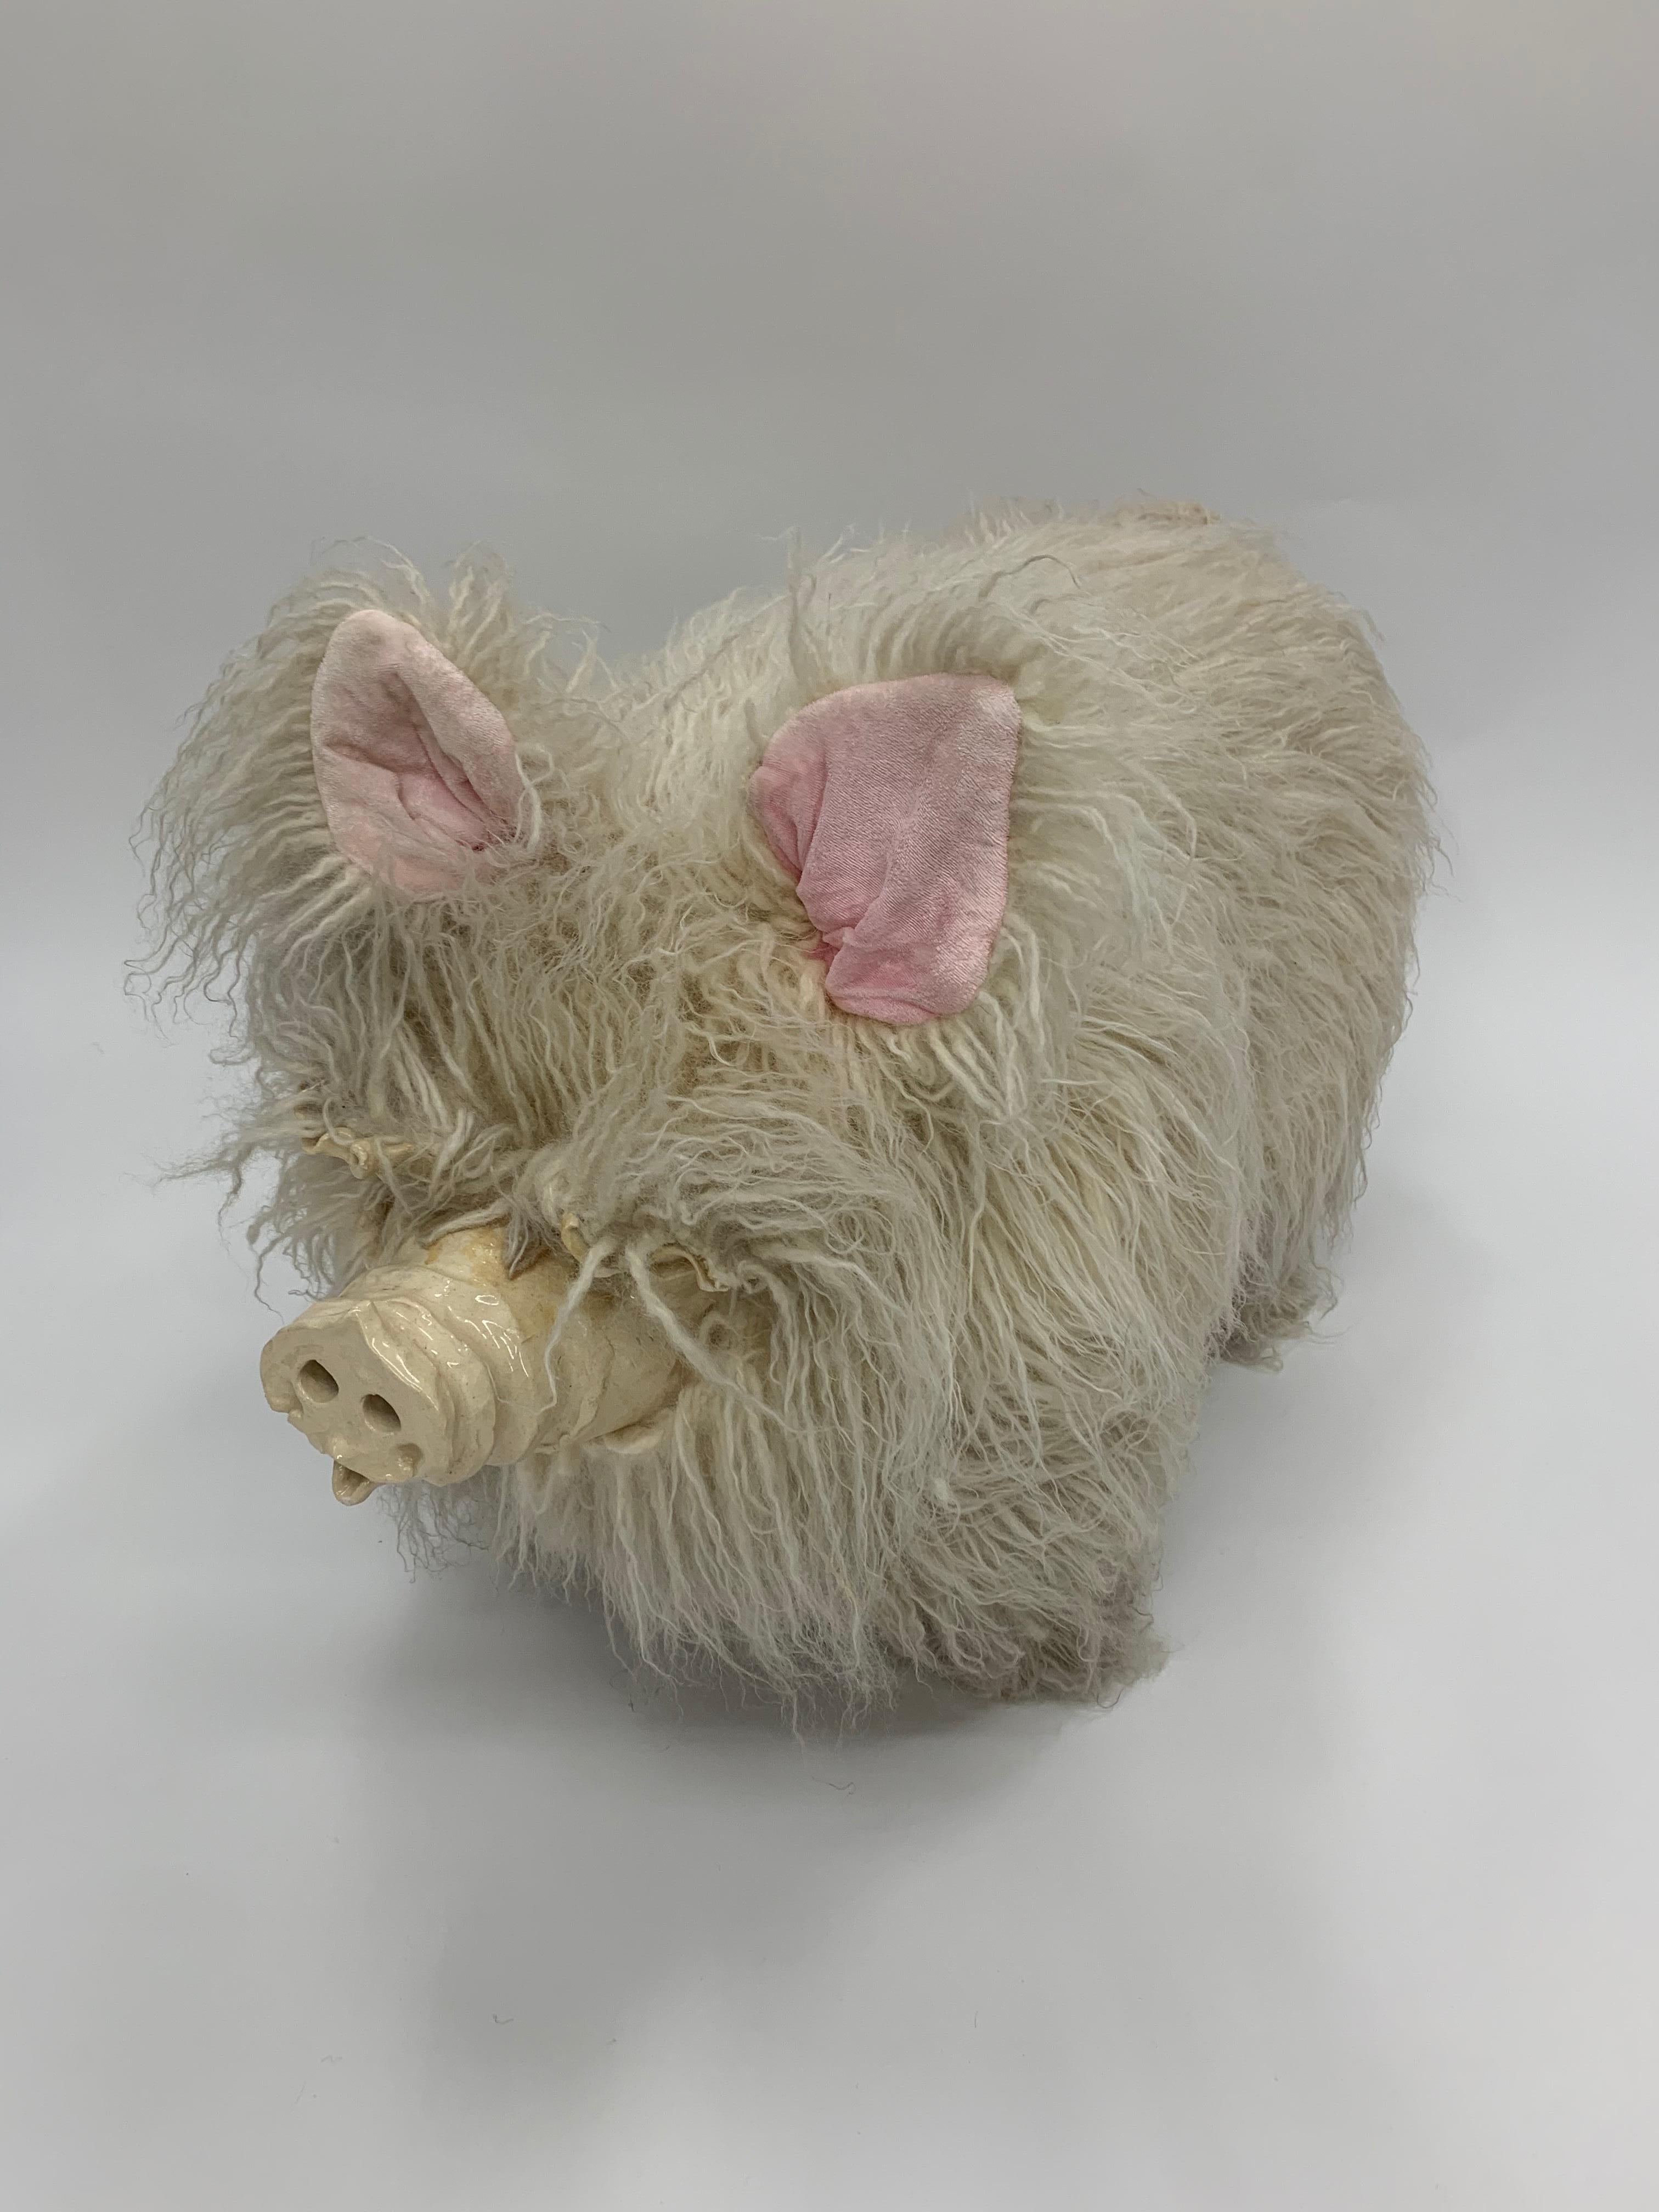 Very rare sculptured pig bench or foot stool by Edna Cataldo. The artist used flocati wool and ceramic to create a unique piece. The face is sculptured with a glazed ceramic finish. 

Edna Cataldo is known for her animal sculptures, where the